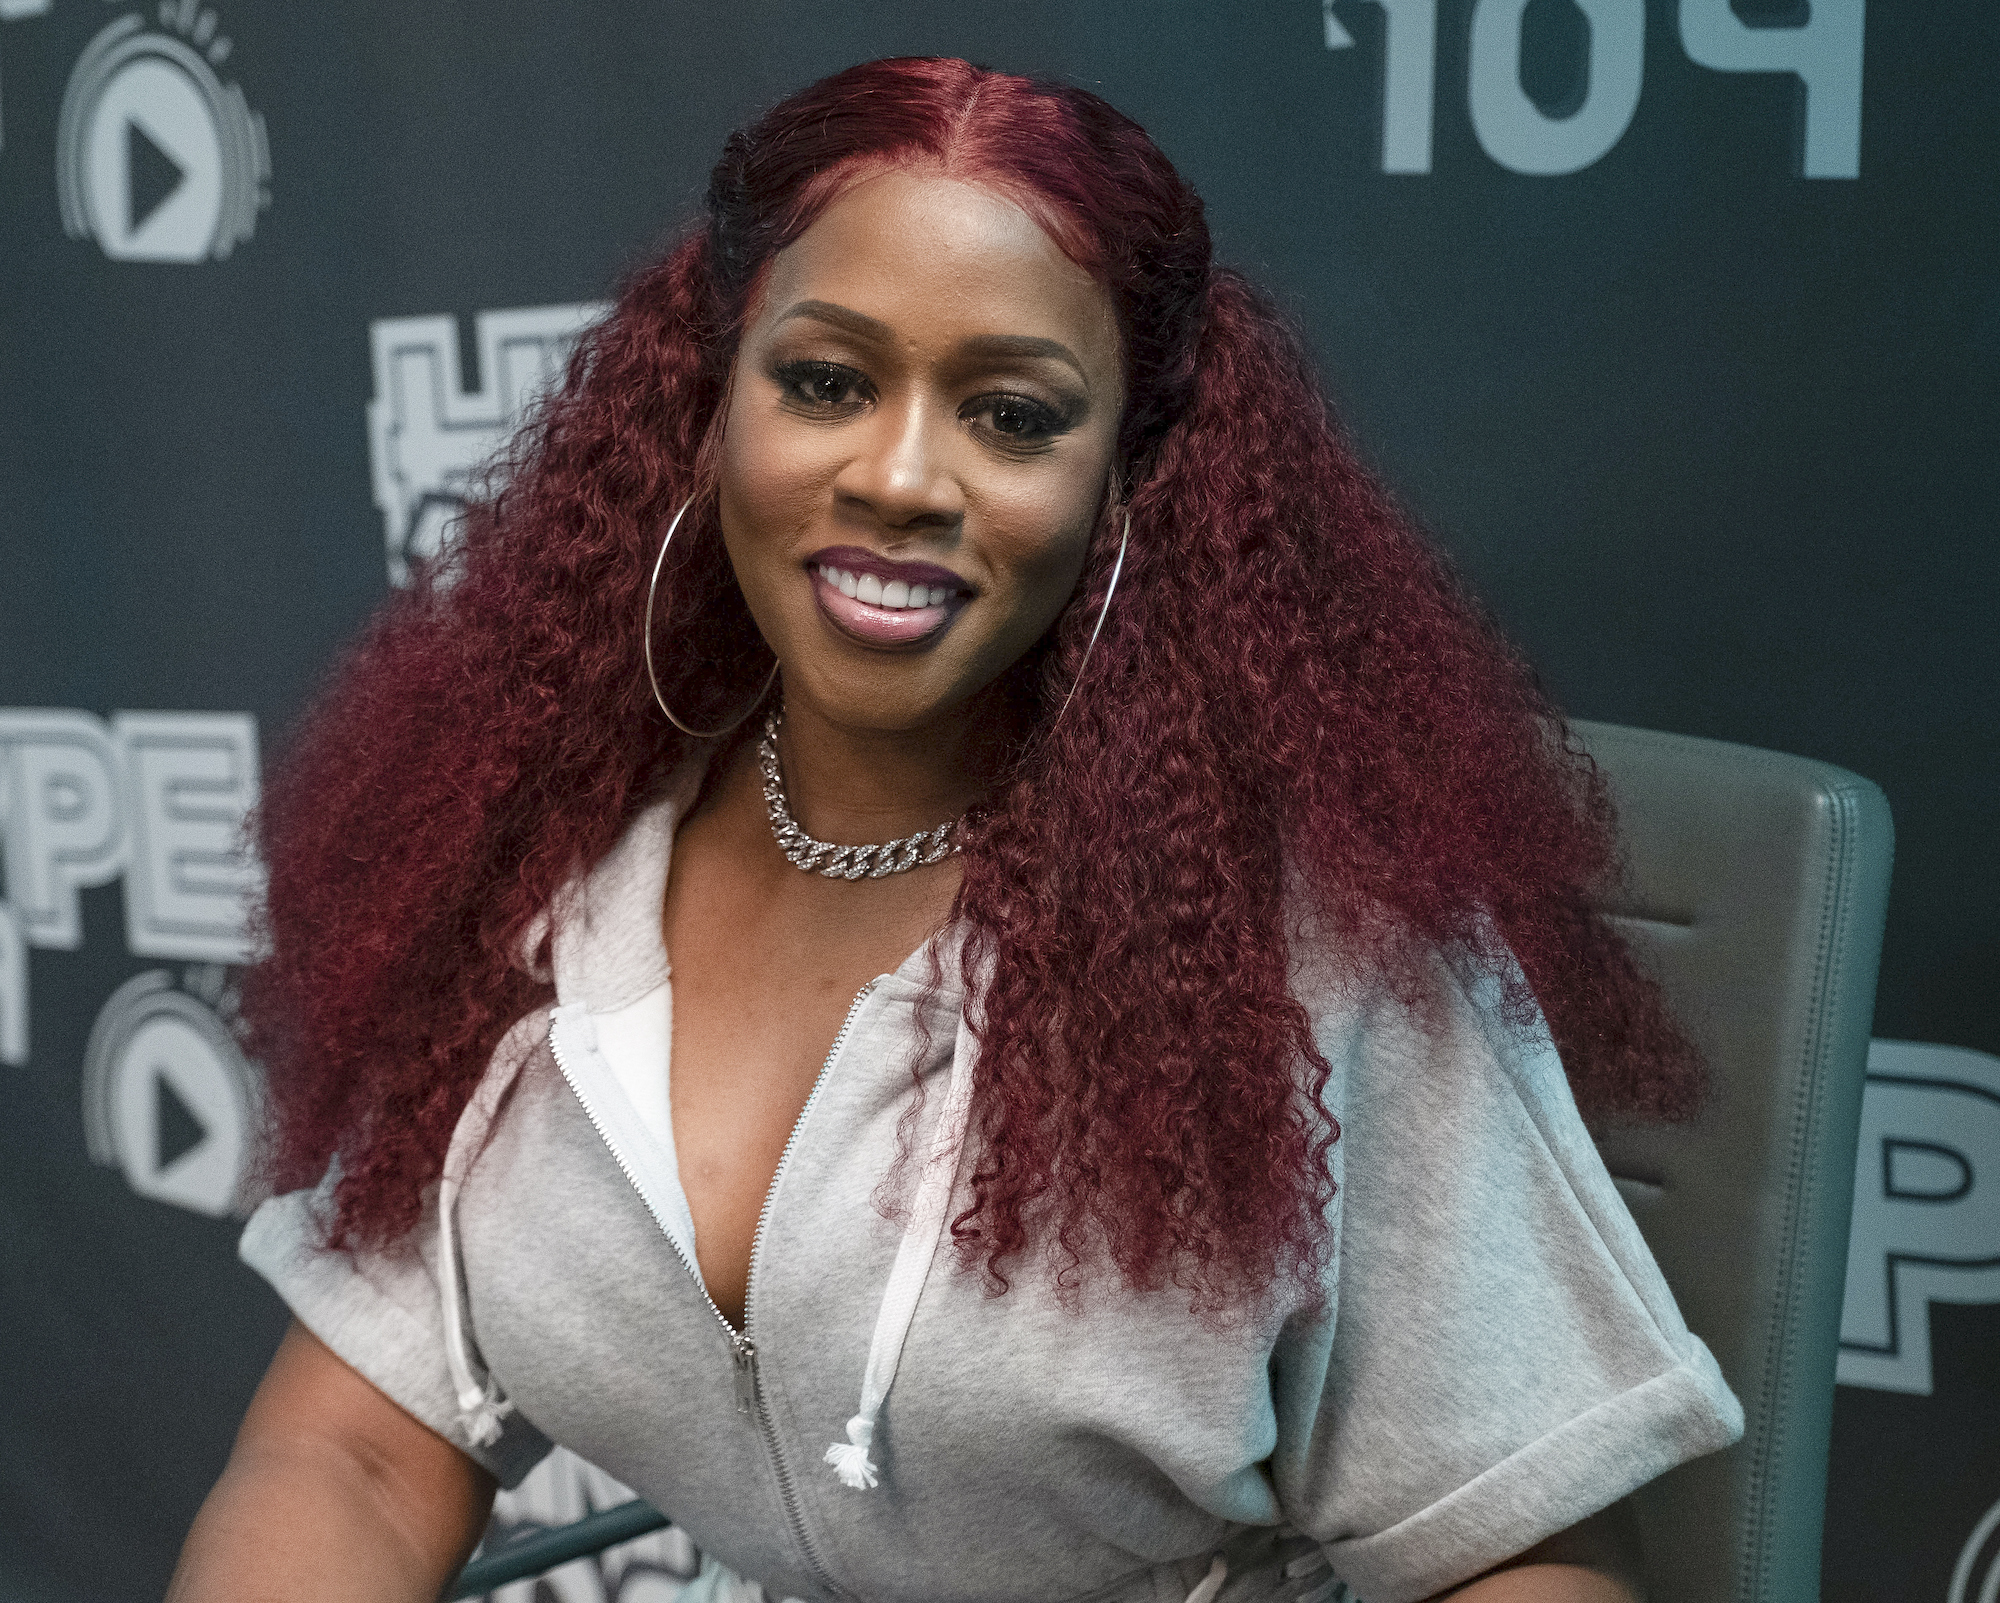 Remy Ma wearing red hair